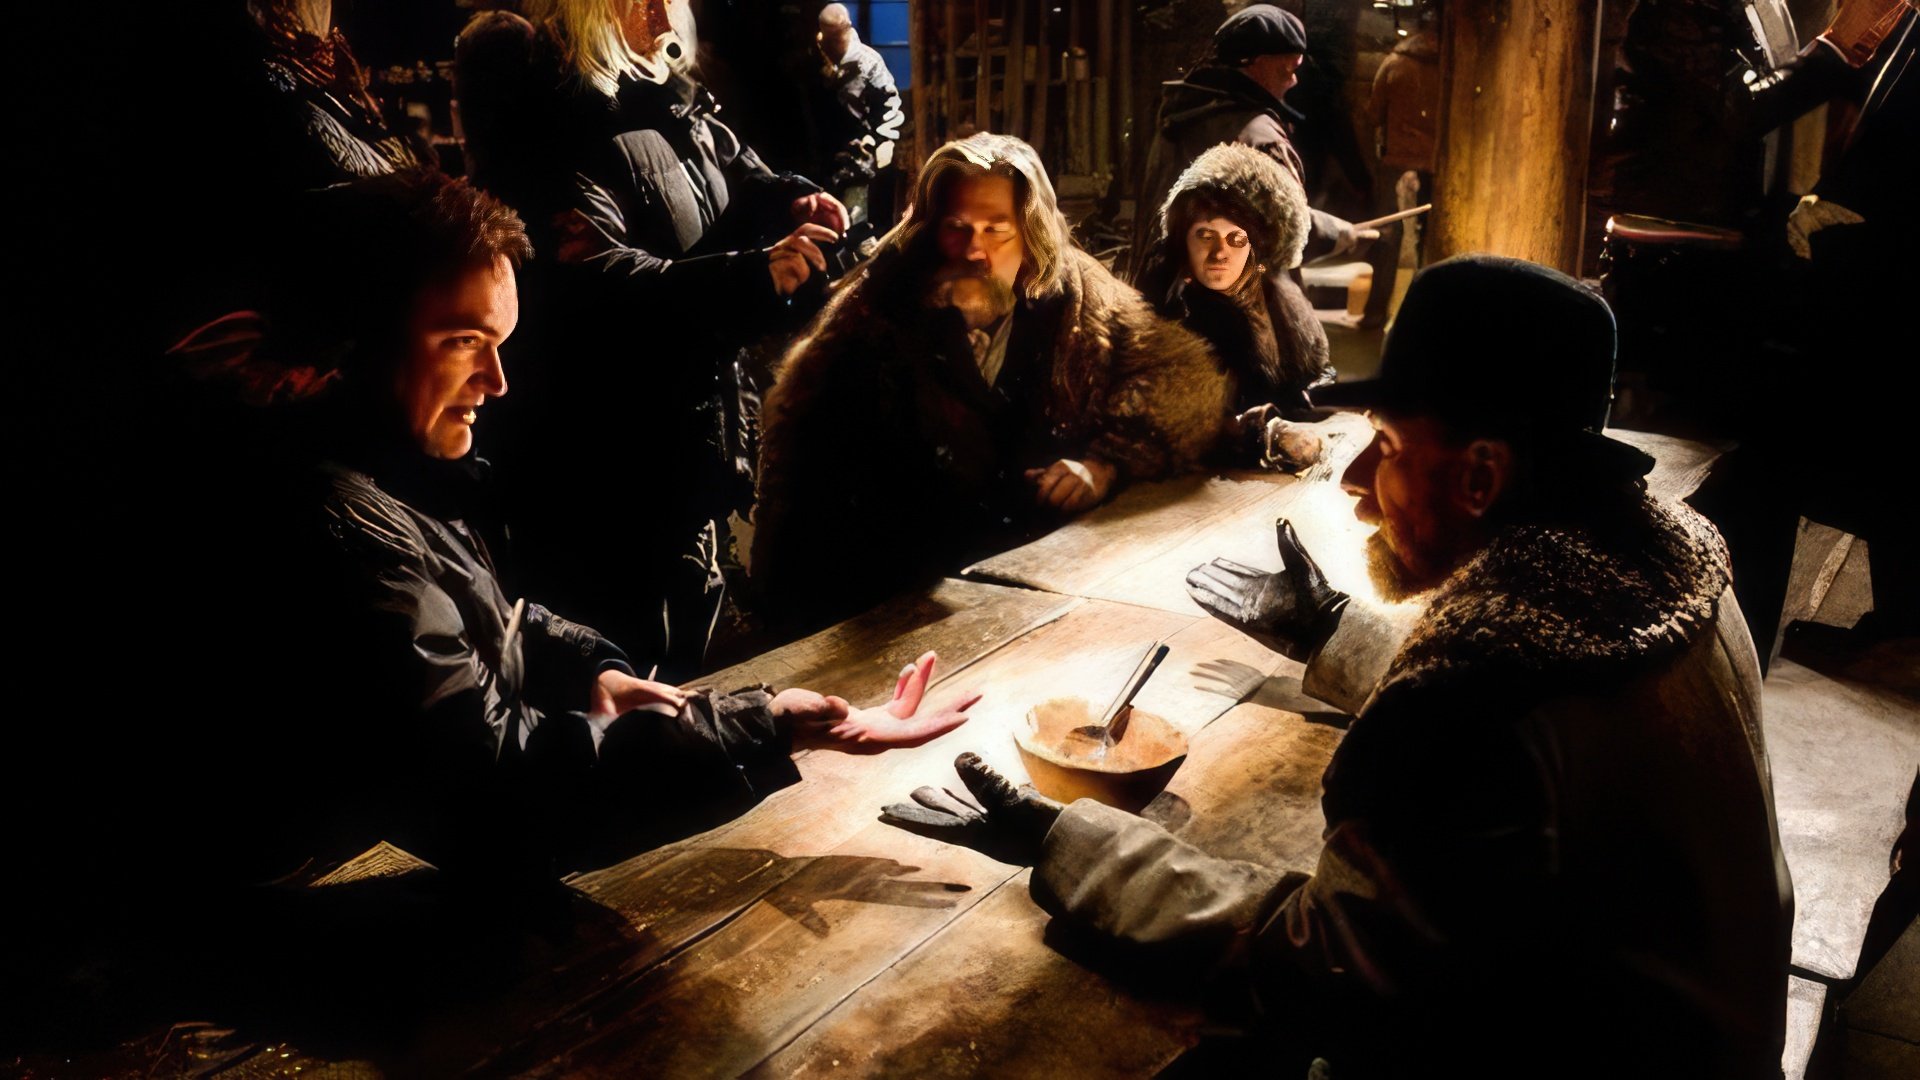 At one stage the release of The Hateful Eight (2015) seemed impossible due to script leakage